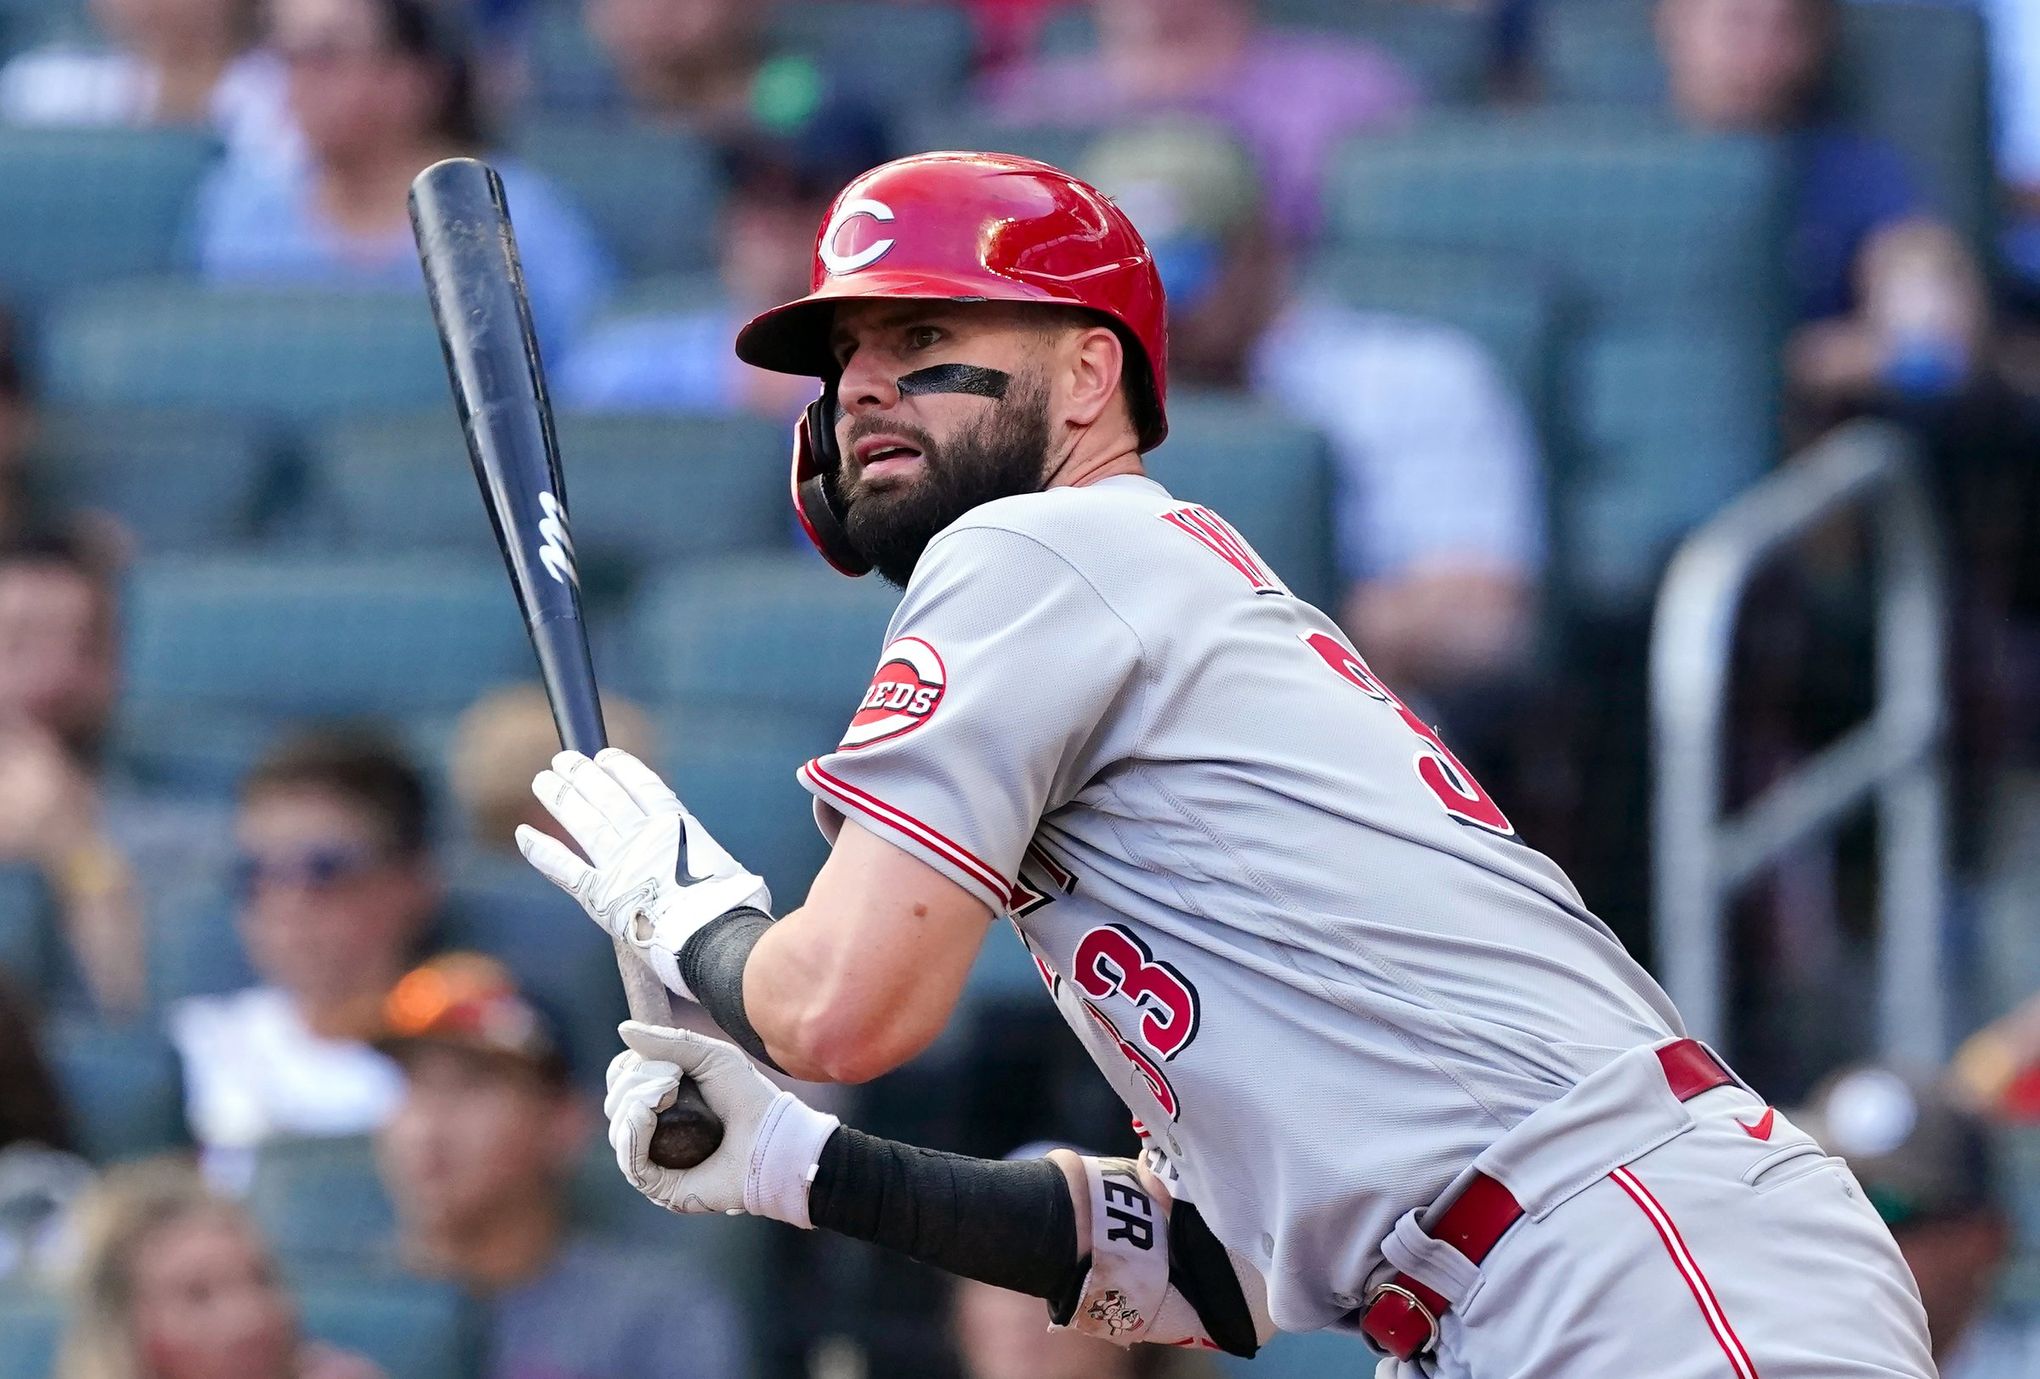 Mariners complete blockbuster trade with Reds for All-Star Jesse